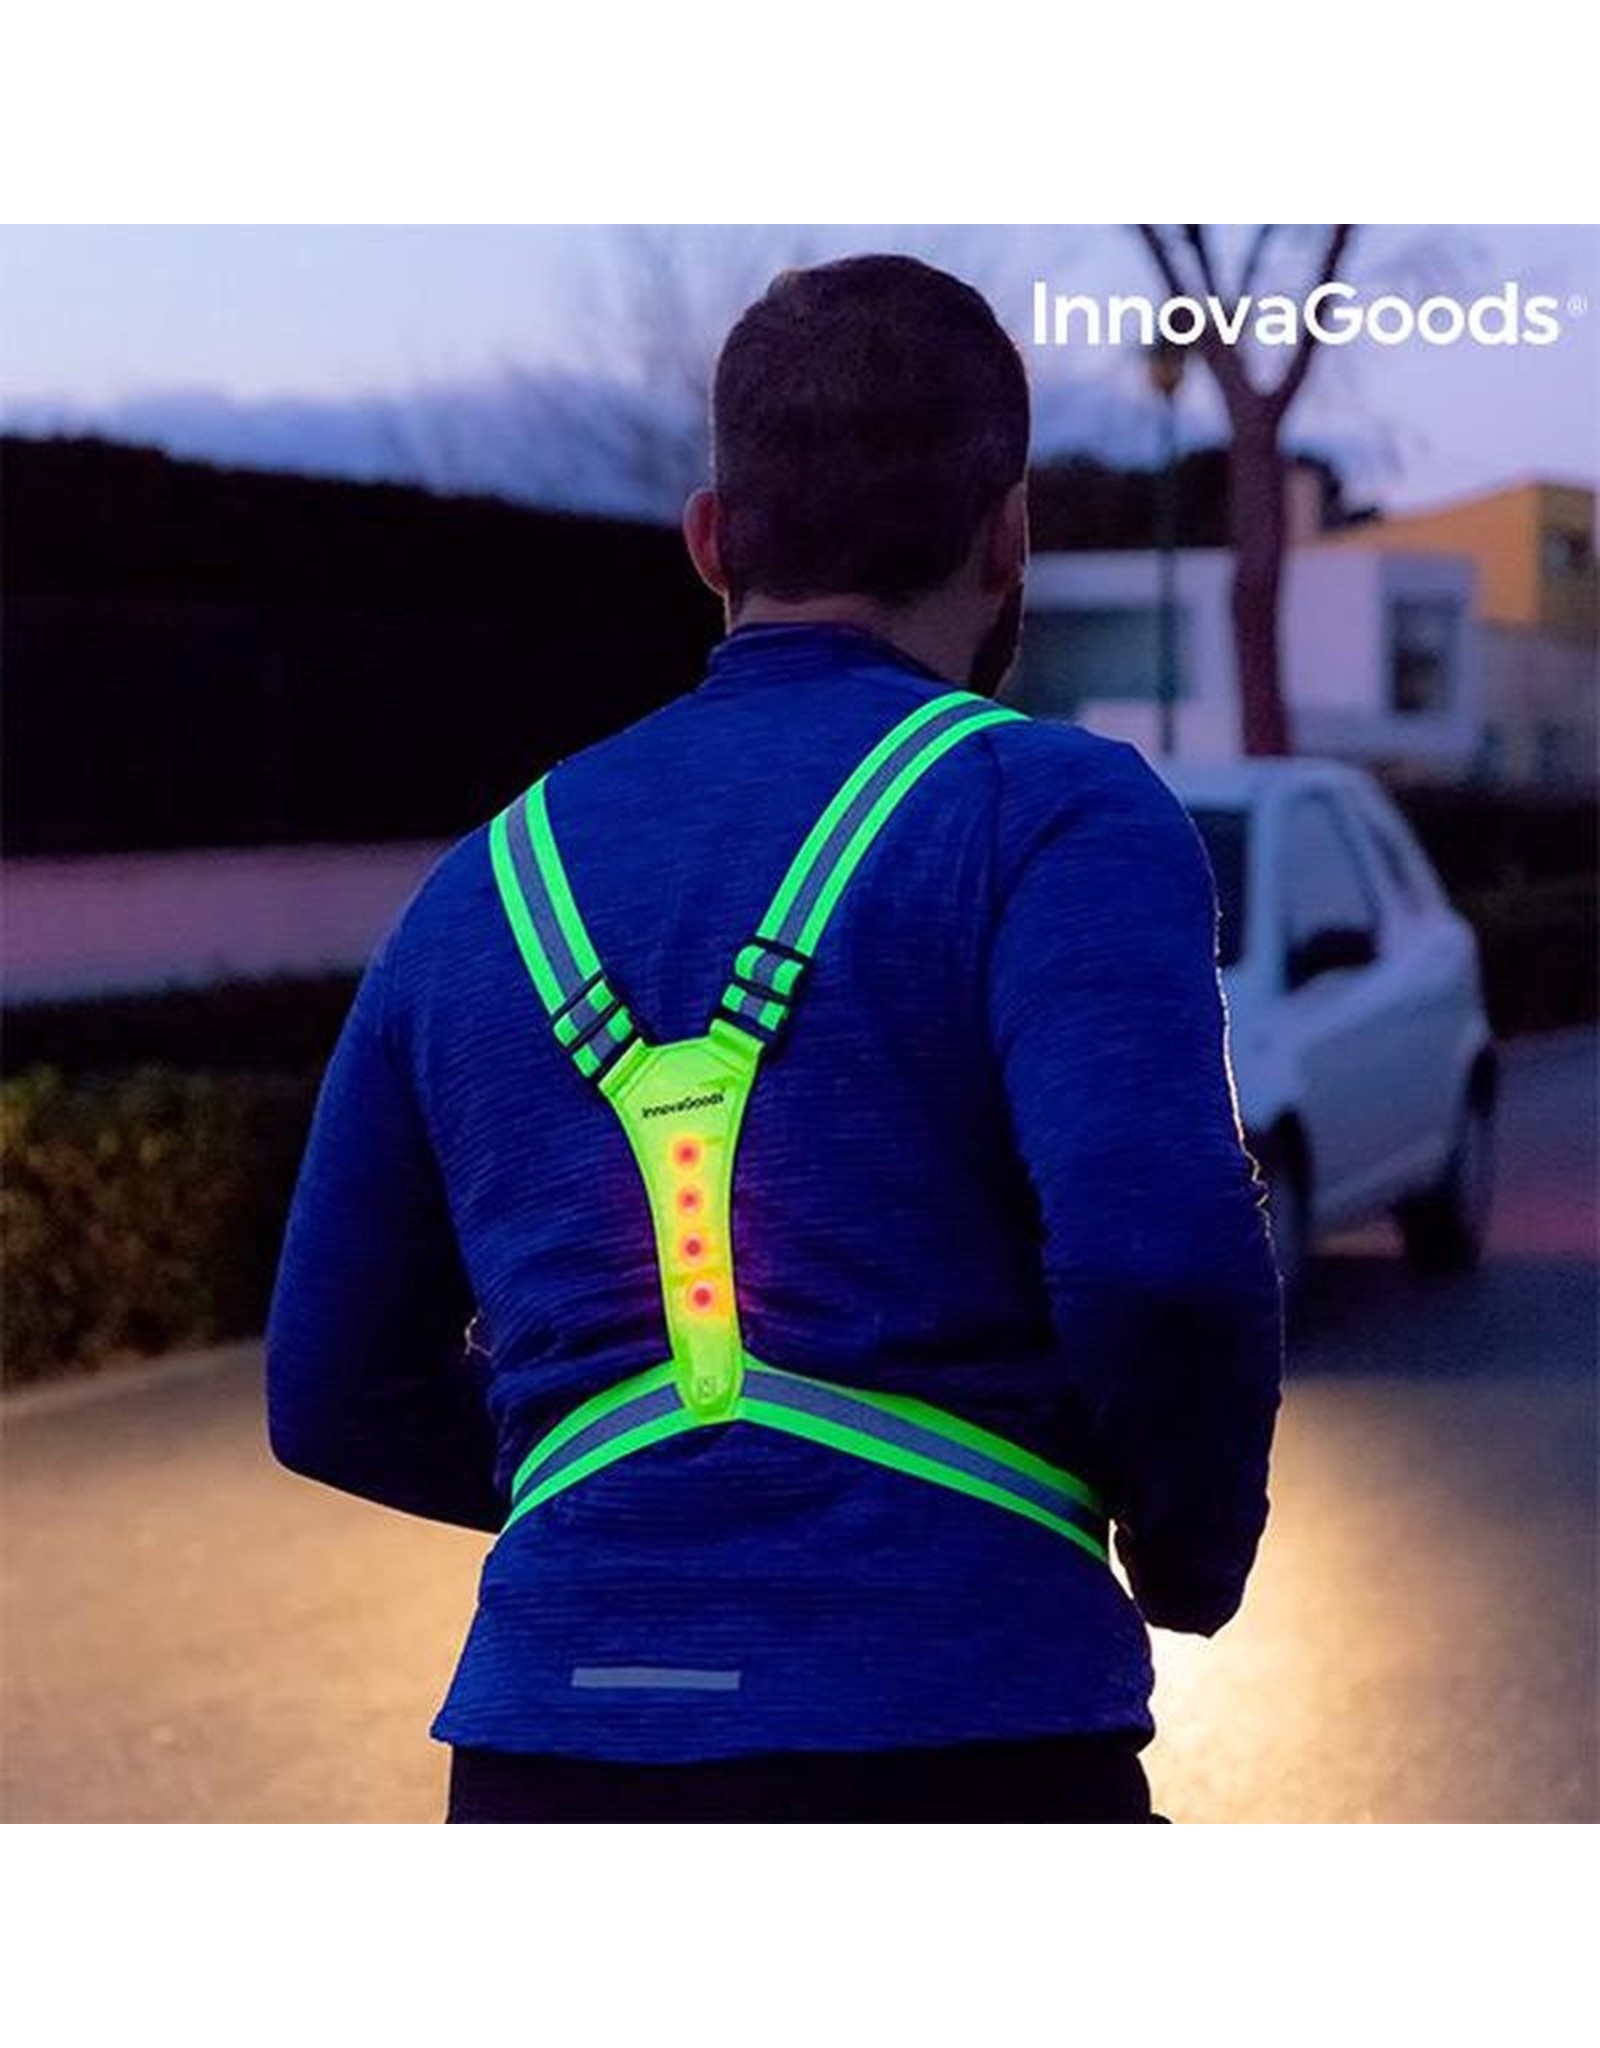 InnovaGoods Innovagoods - LED Reflecterend Hardloopvest - Geel reflectief - One Size